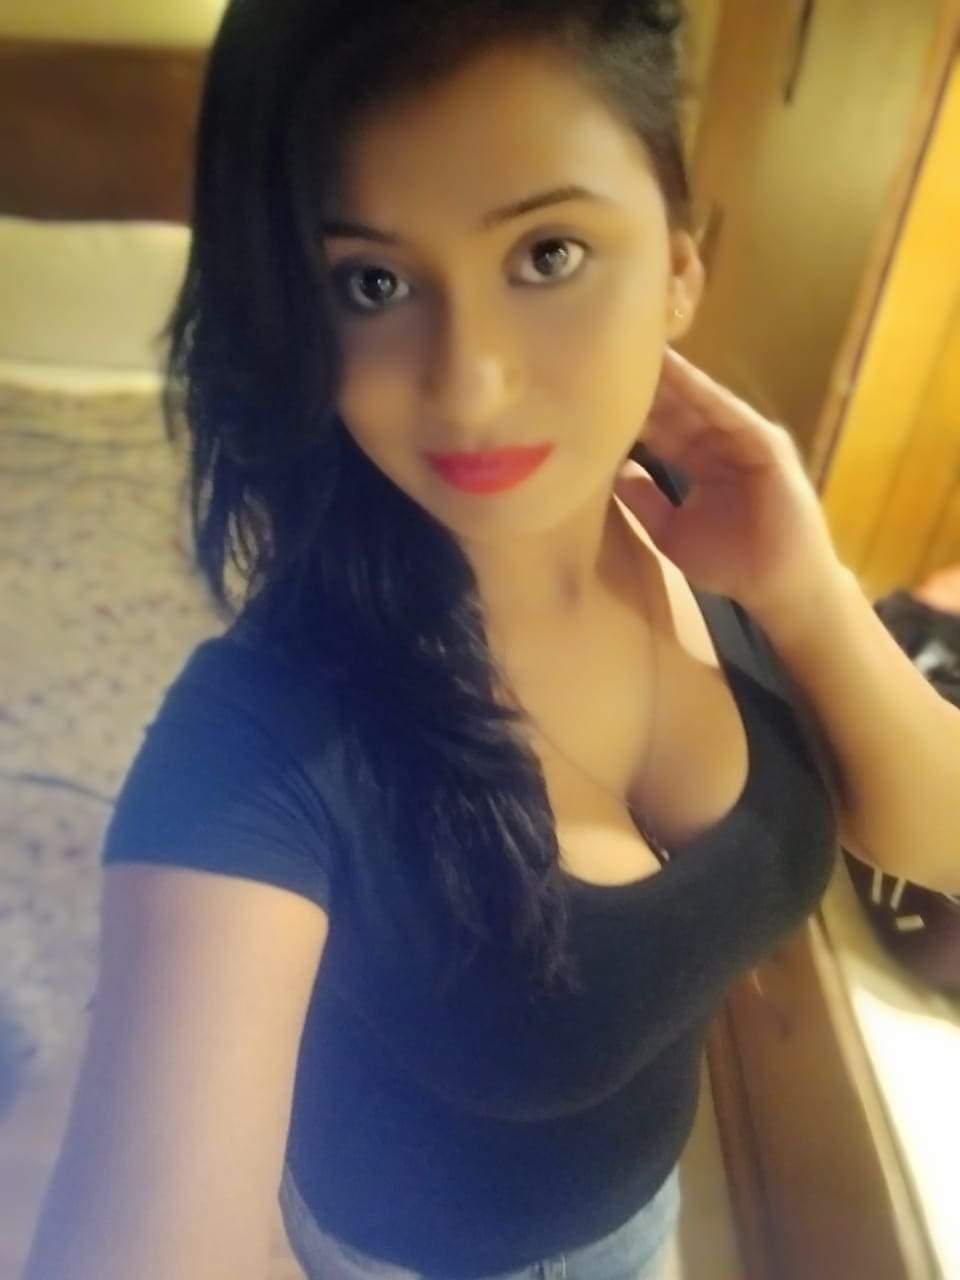 Call girls in delhi for your satisfying desirement is done in shot and night period